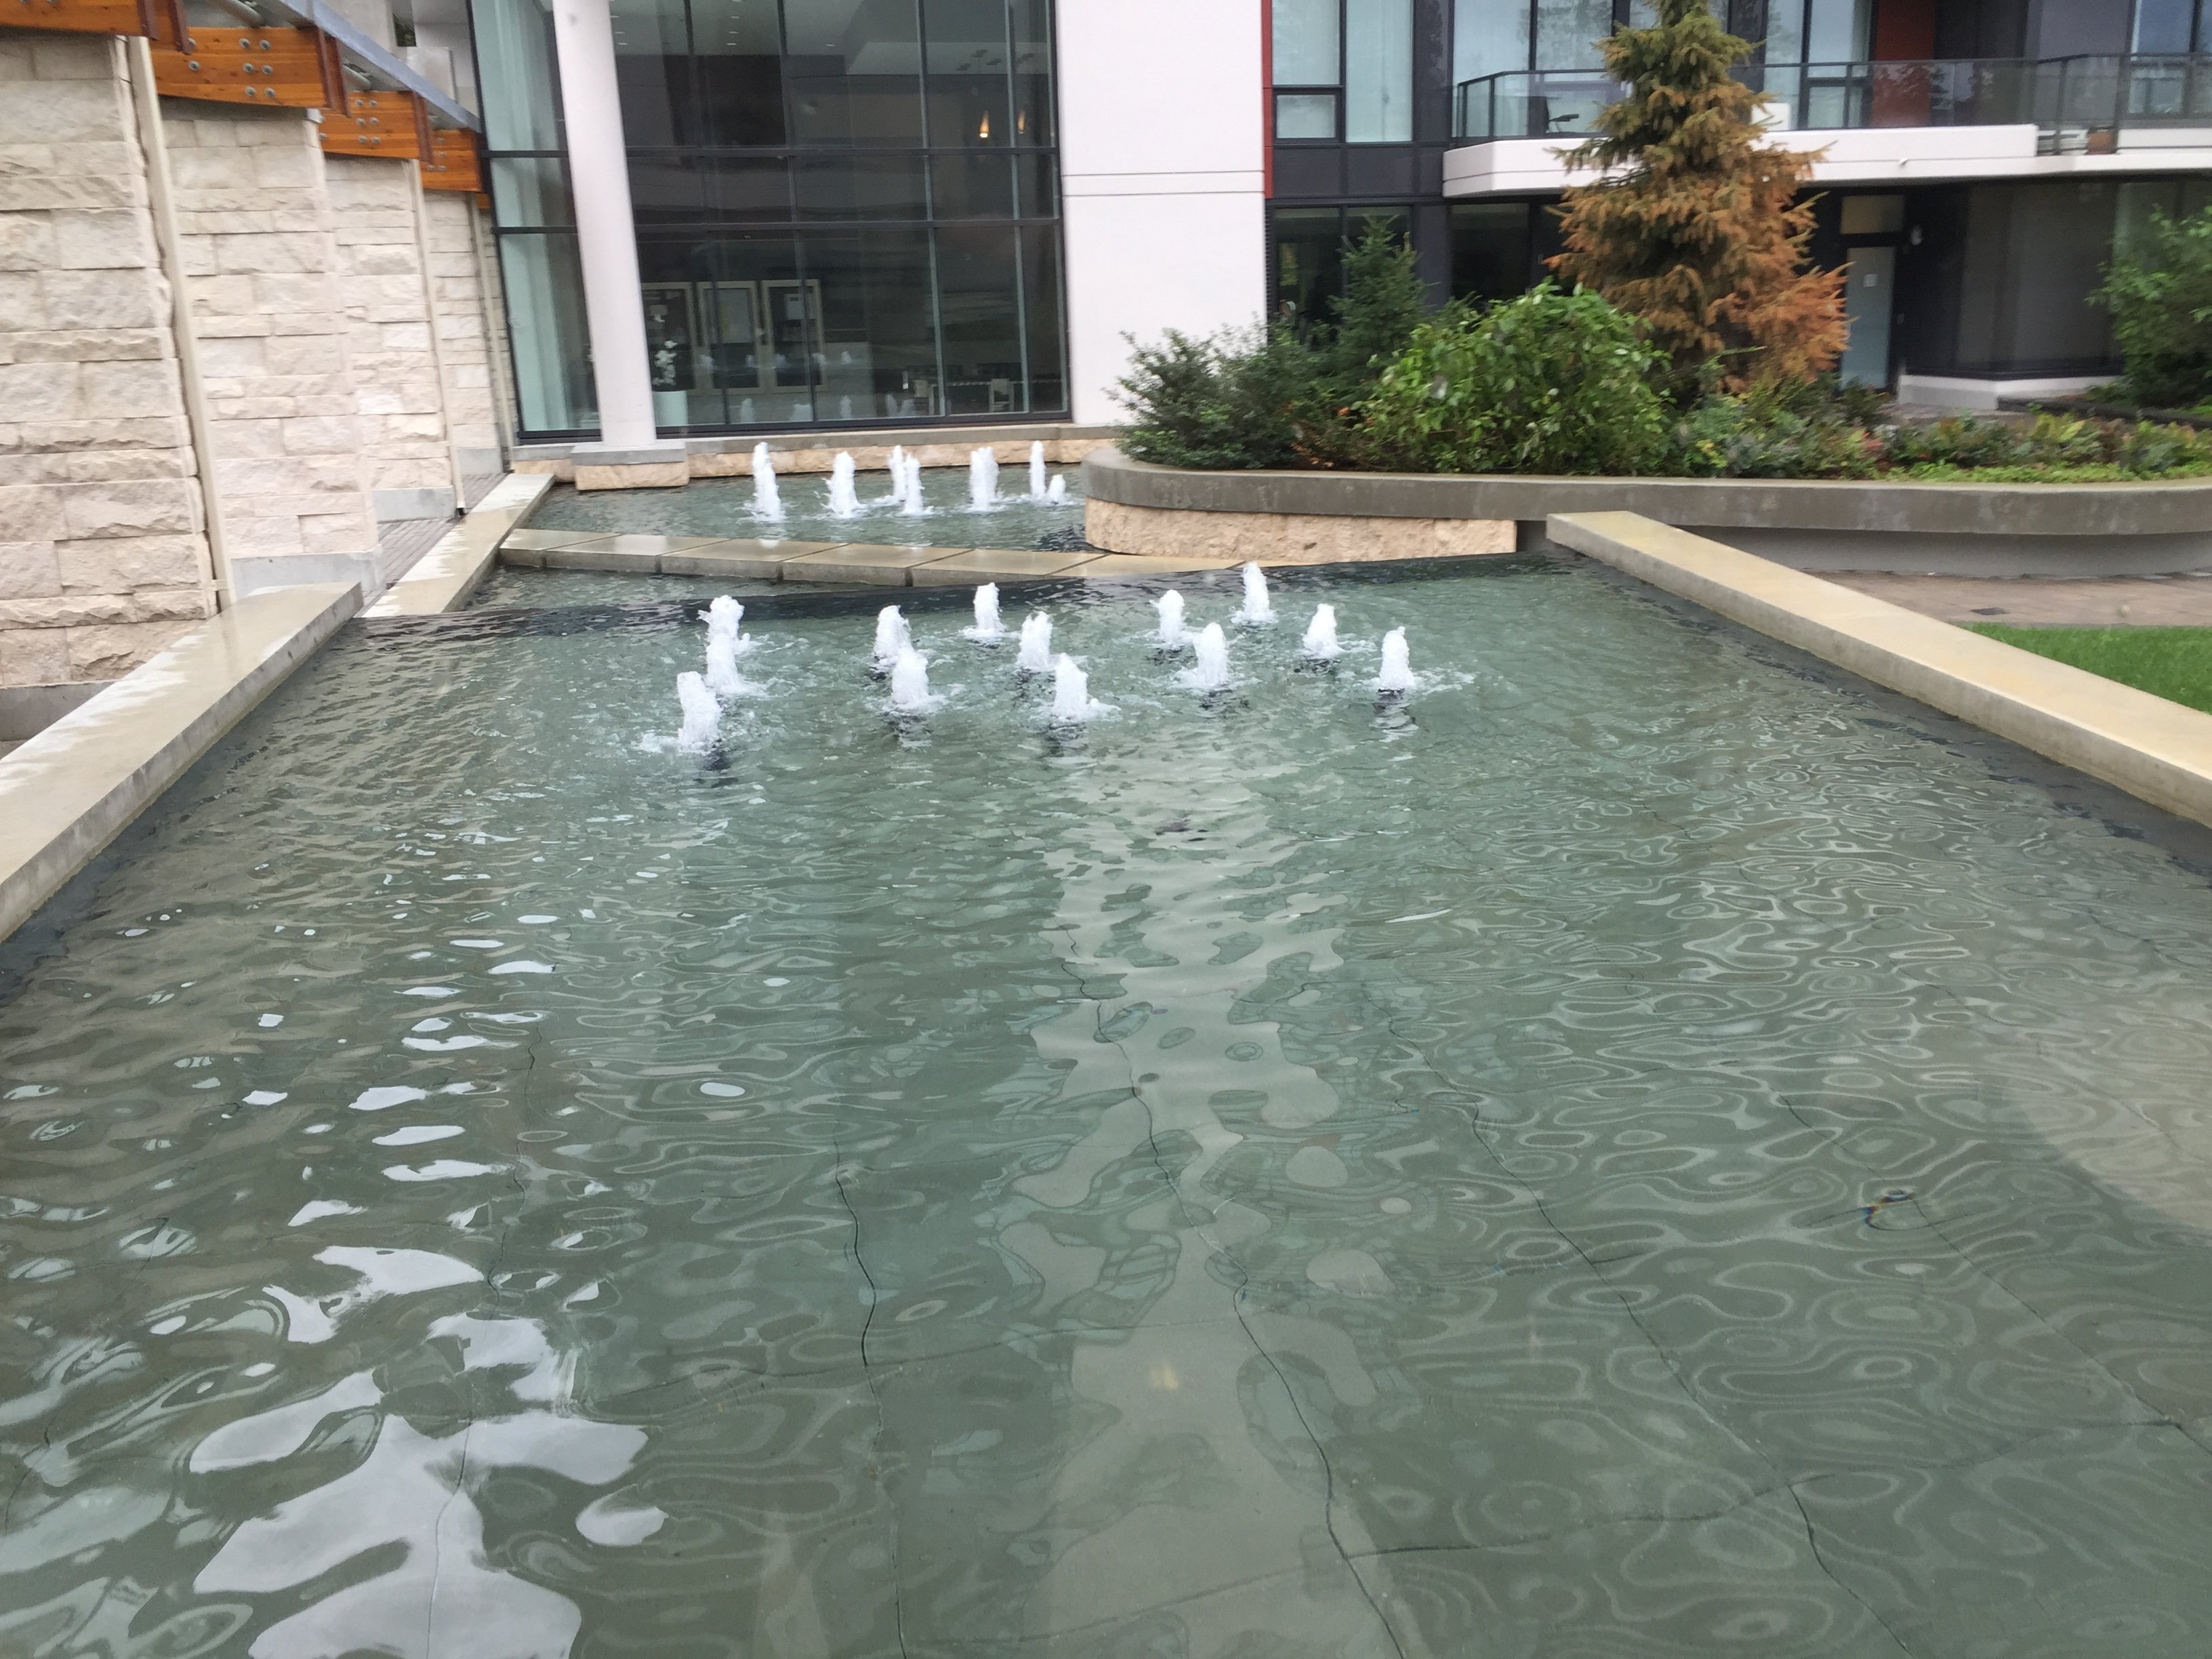 The Laureates Water Feature!